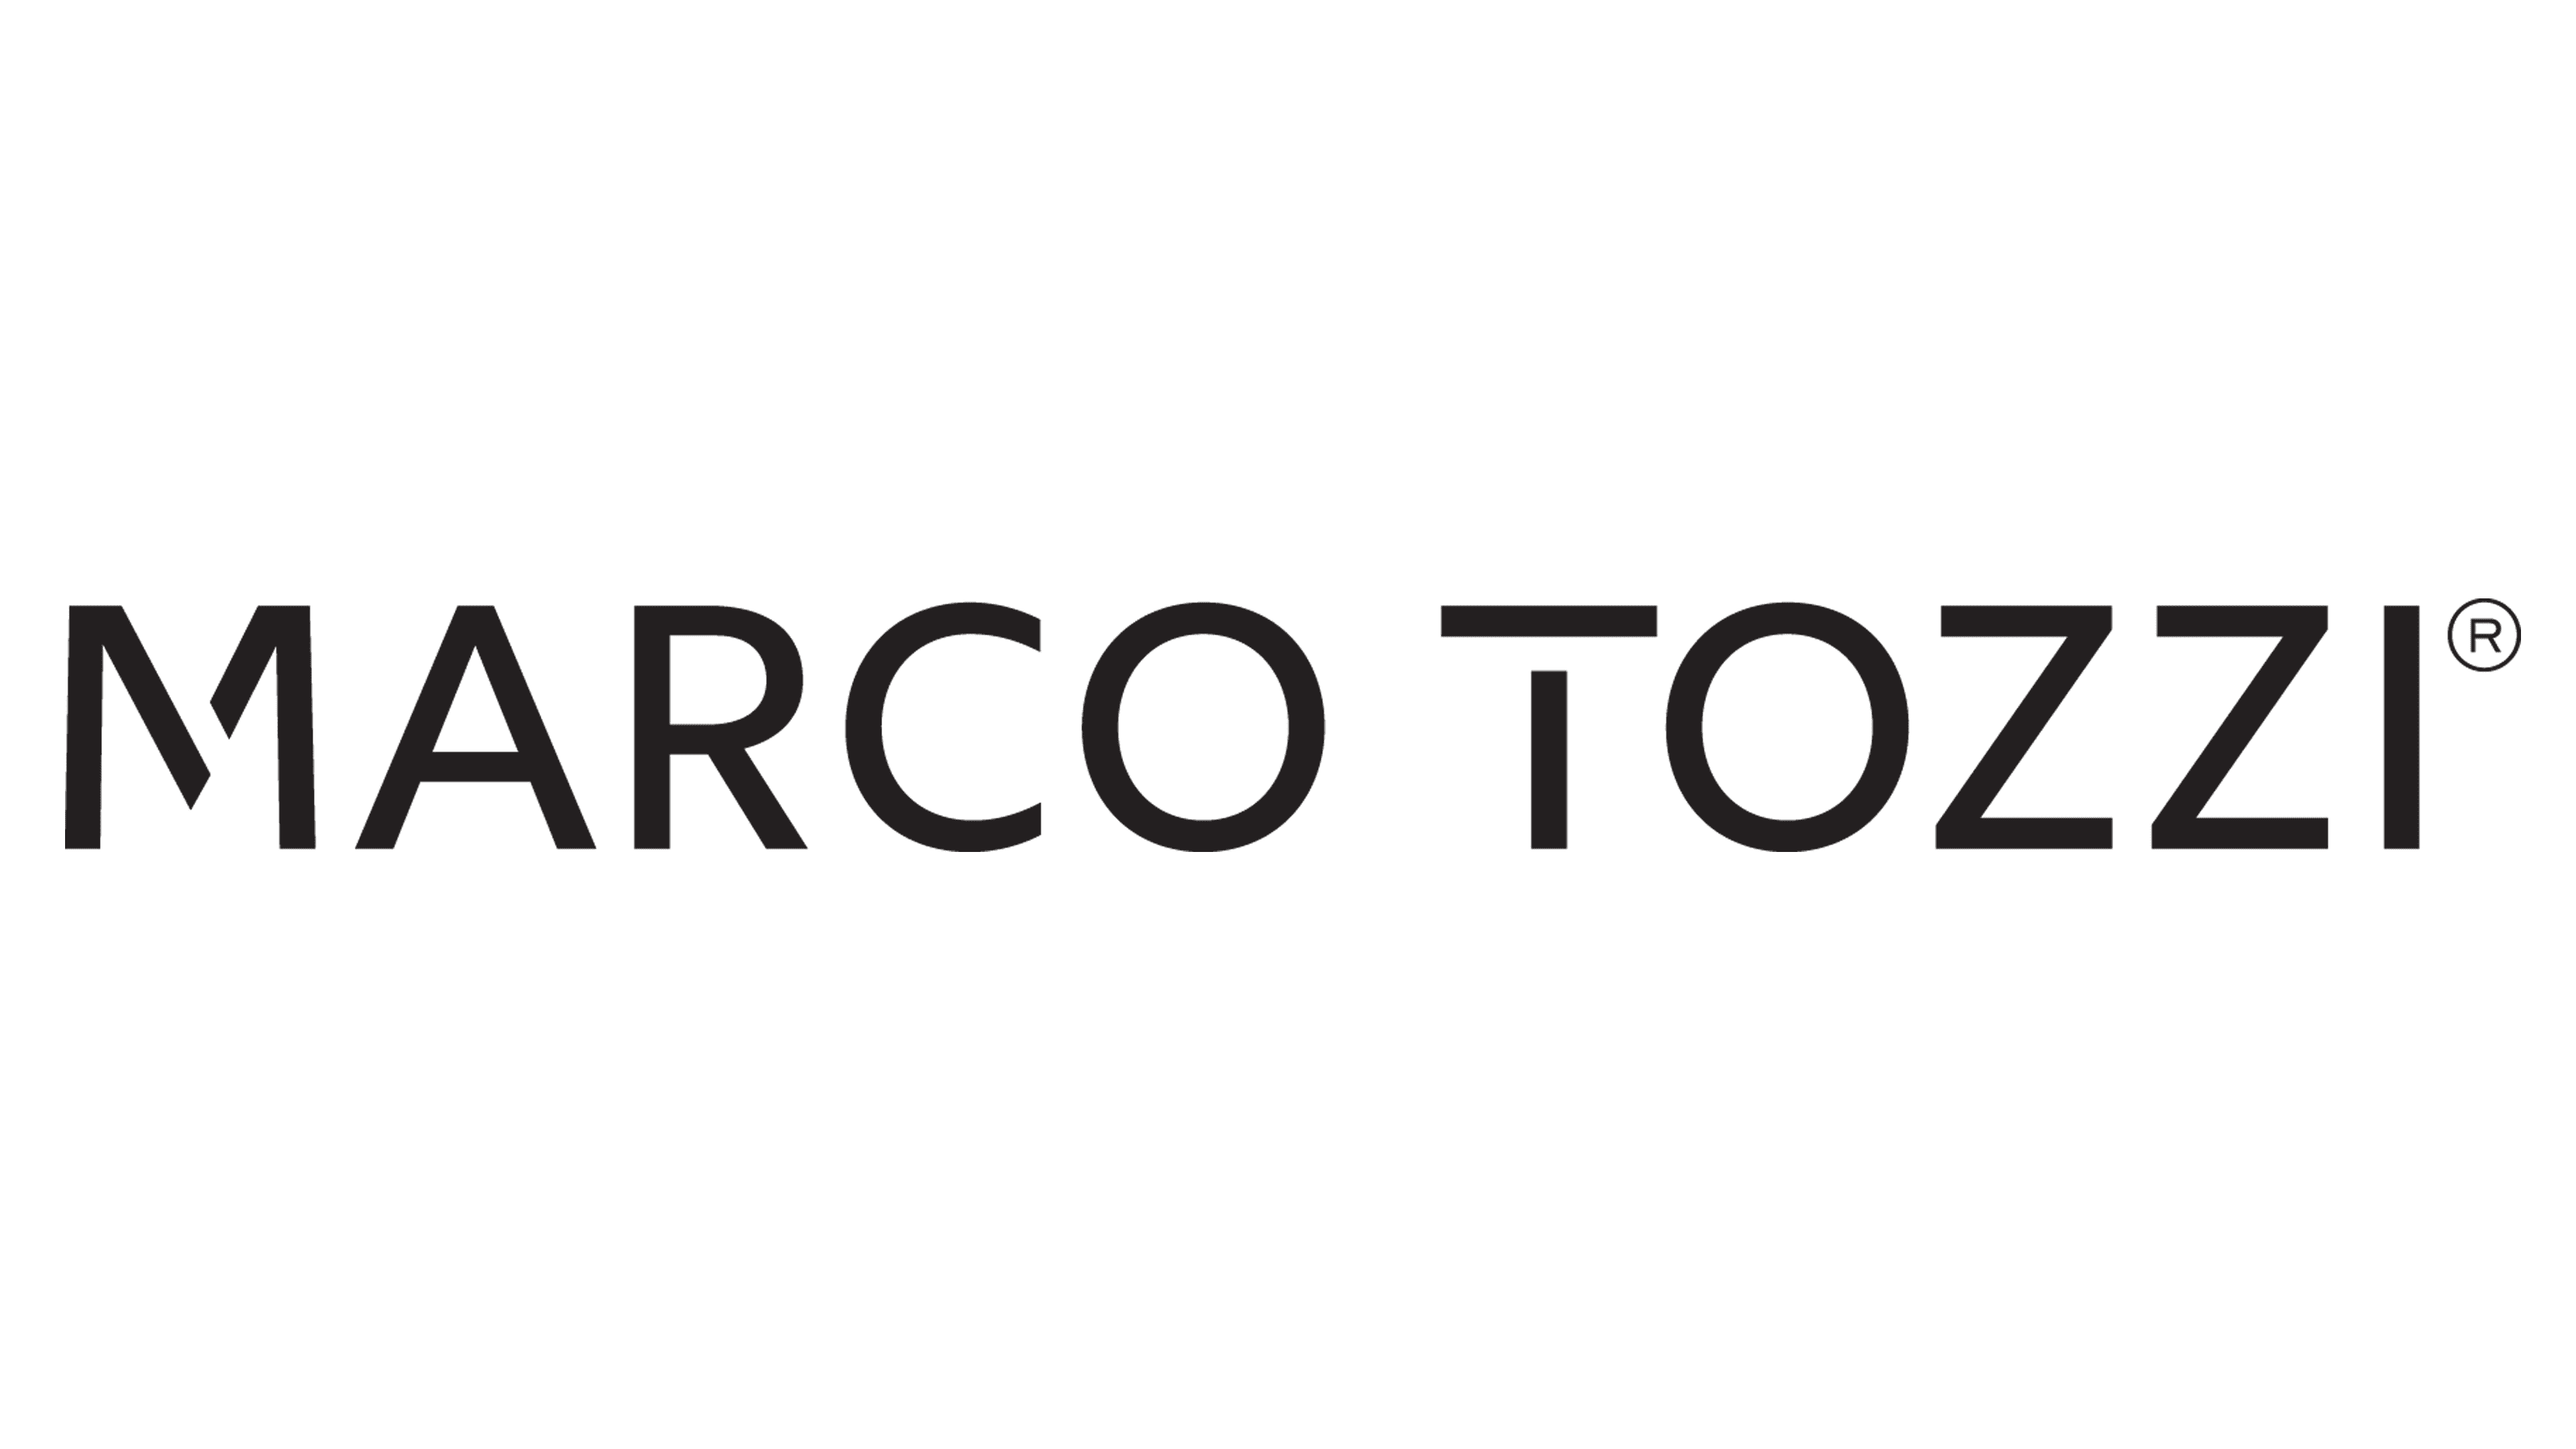 Londen kosten Groot universum Marco Tozzi Logo and symbol, meaning, history, PNG, brand